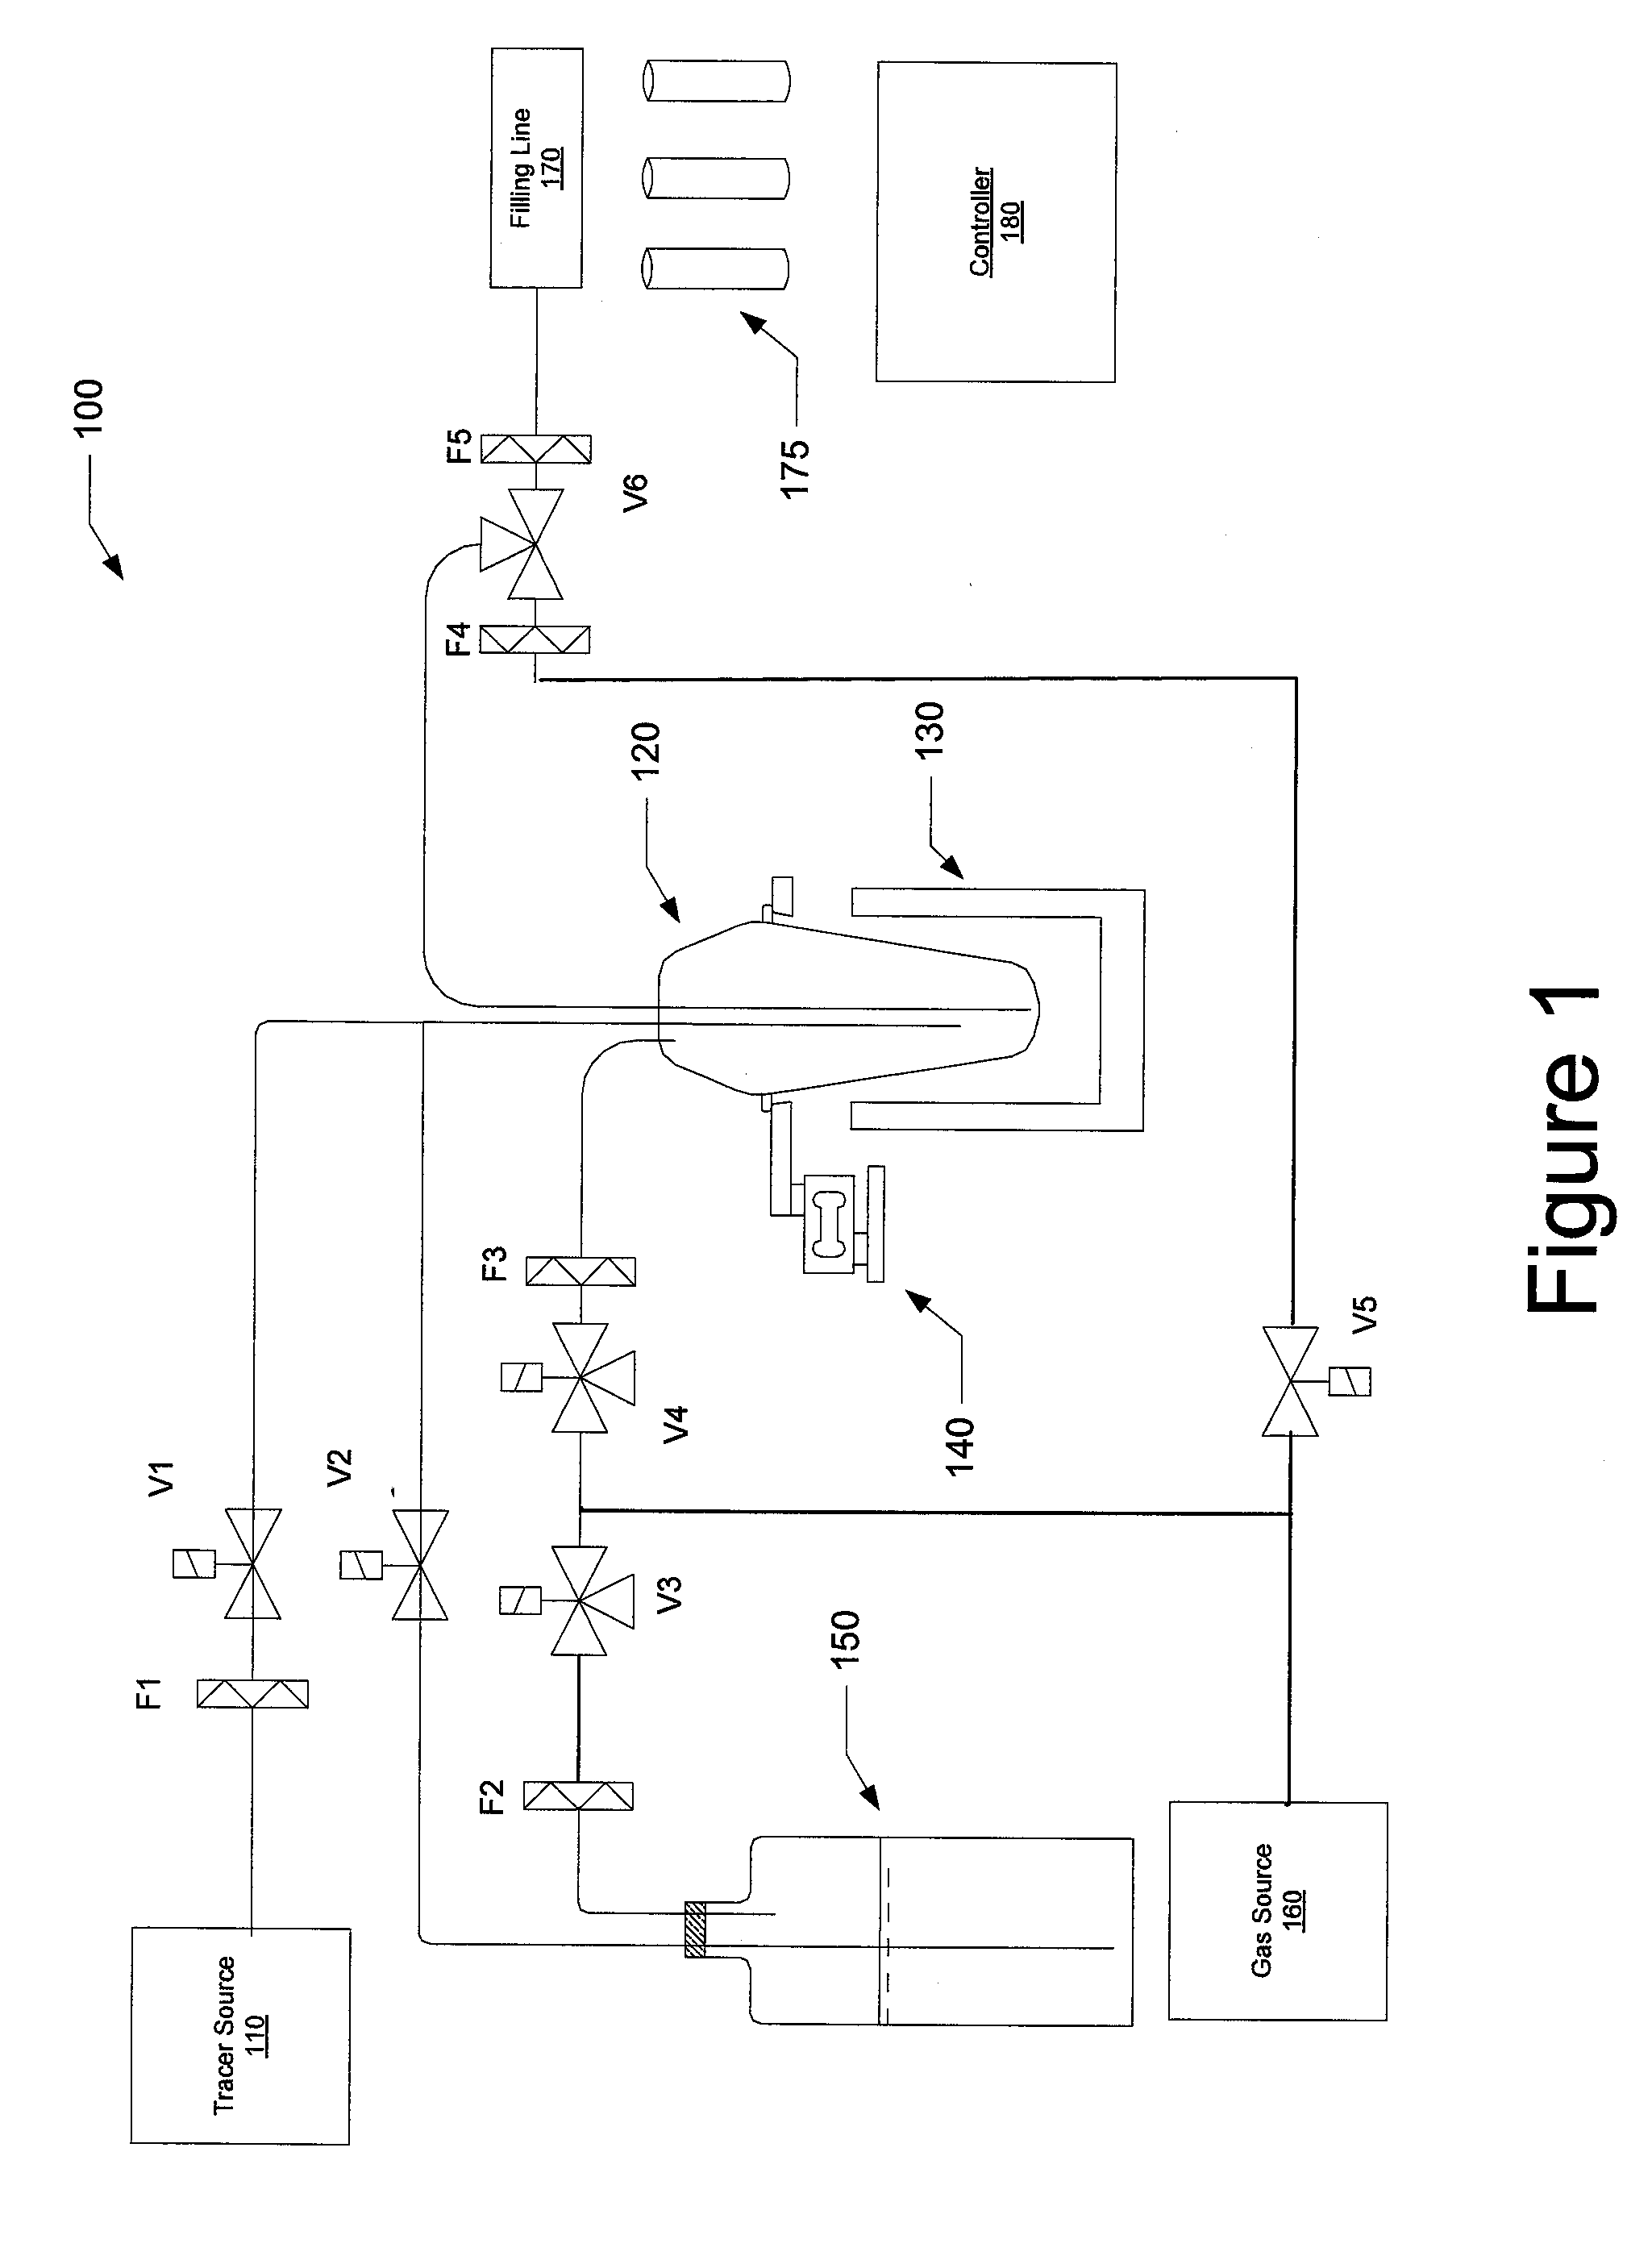 System and method for measurement of radioactivity concentration of a radiopharmaceutical